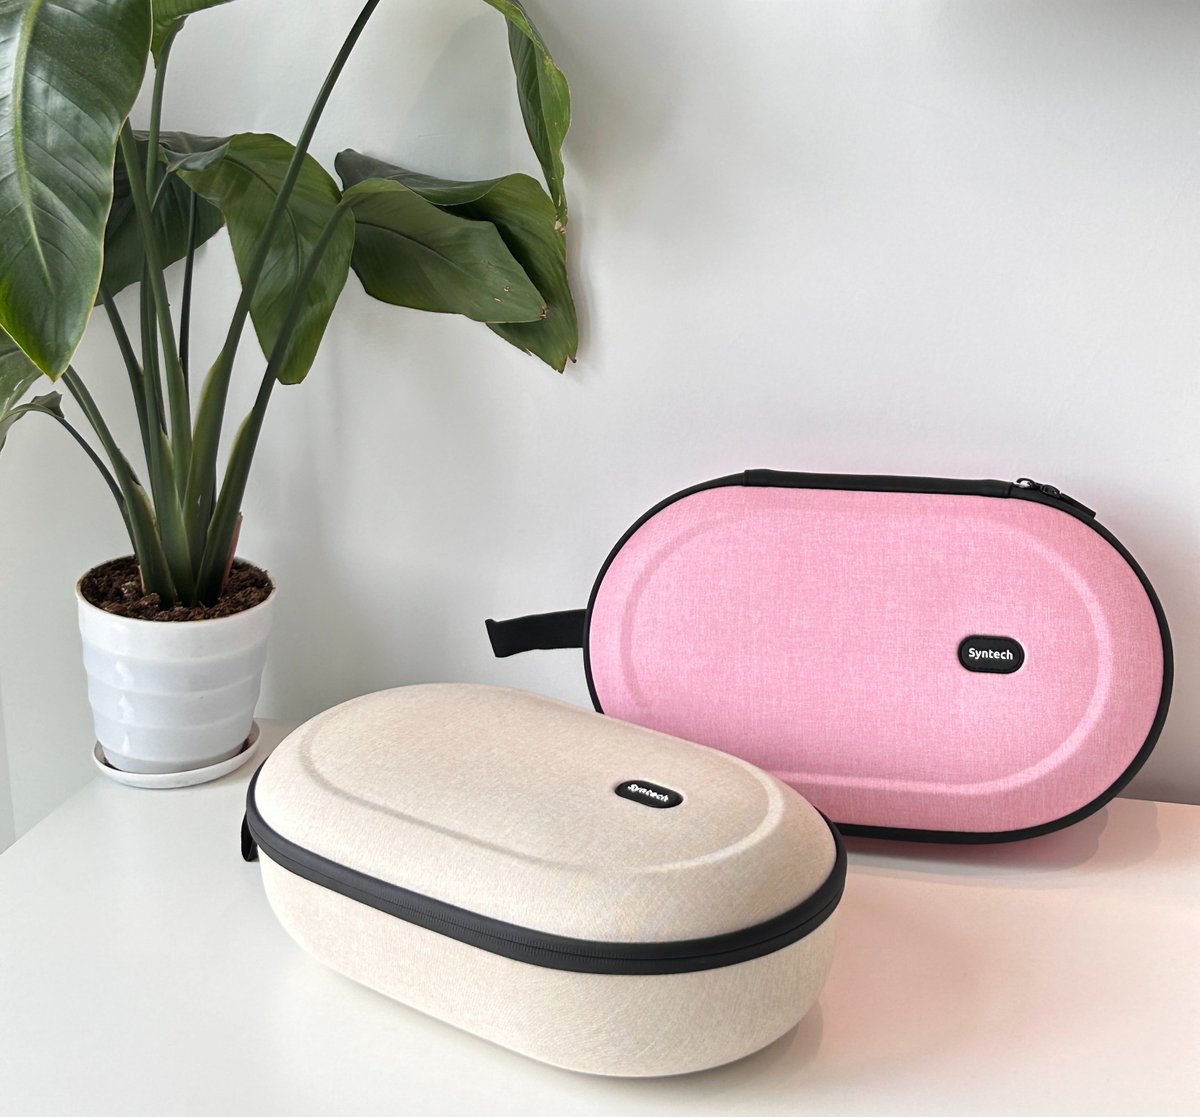 As one of our BEST-SALERS, we are now launching new colors of the VR Carry Case!
Do you like it ?
Which one will you choose ?

#vr #syntech #syntechcarrycase #vrcarrycase #carrybag #vraccessory #vroutdoor #vrcarrybag #newcolors #pink #CreamColor #NewLaunches #vrgames #vrgaming